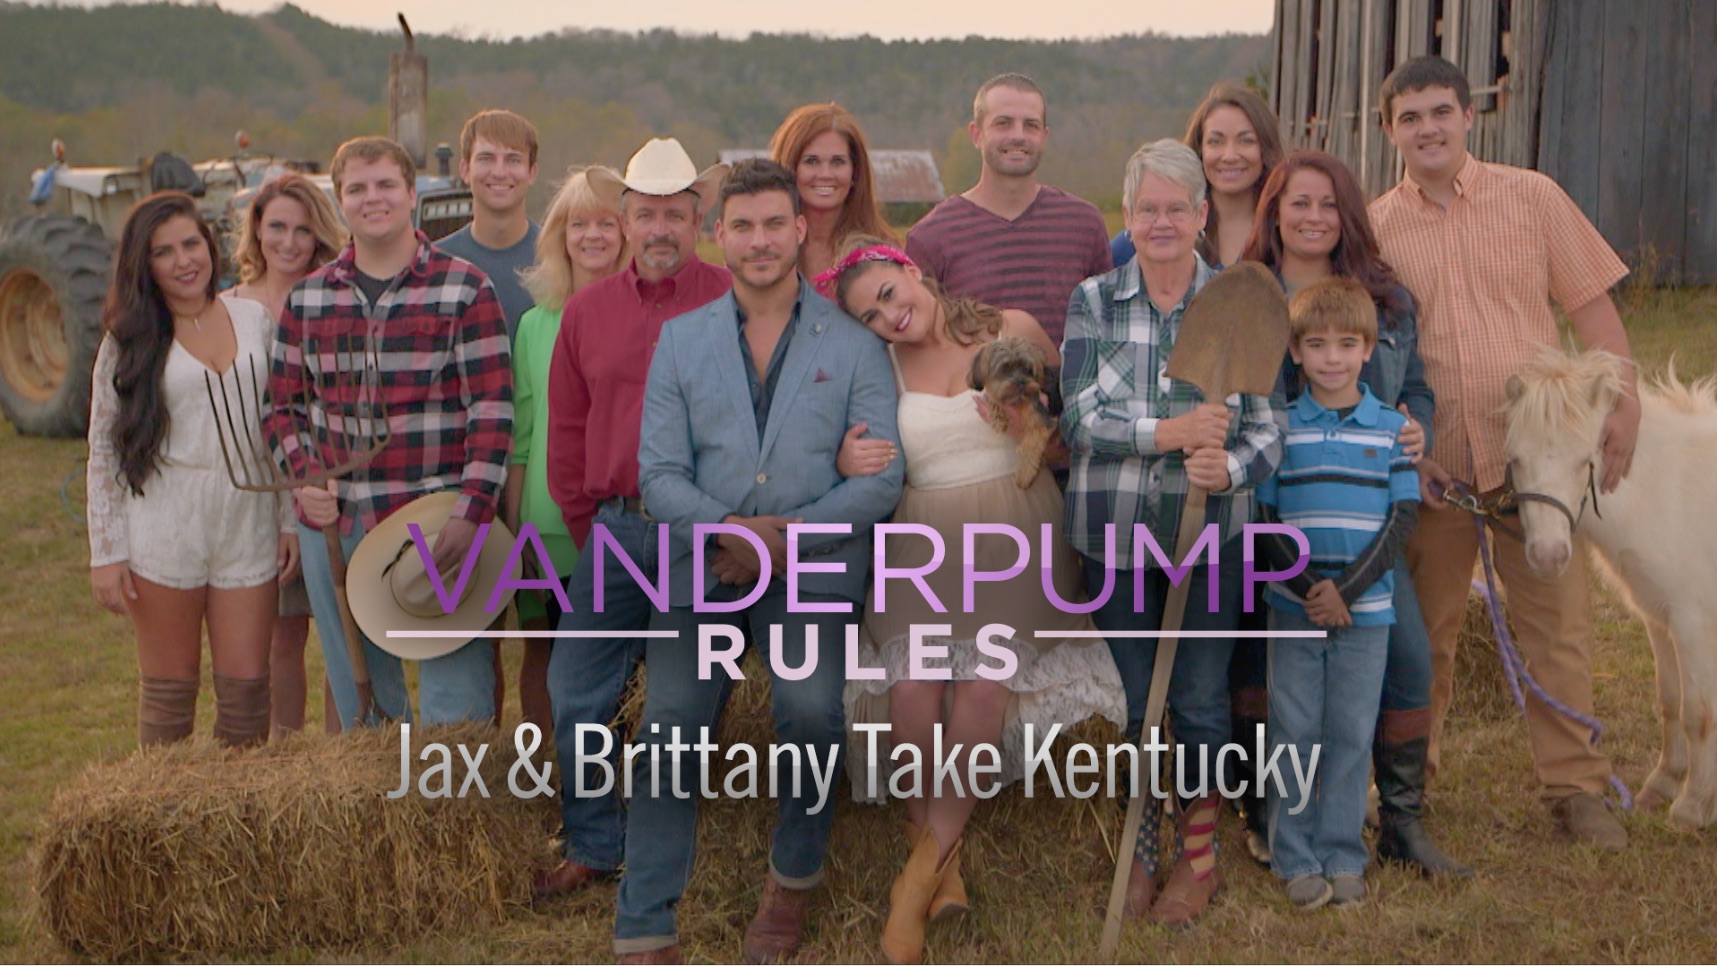 a cast photo from Vanderpump Rules Jax & Brittany Take Kentucky